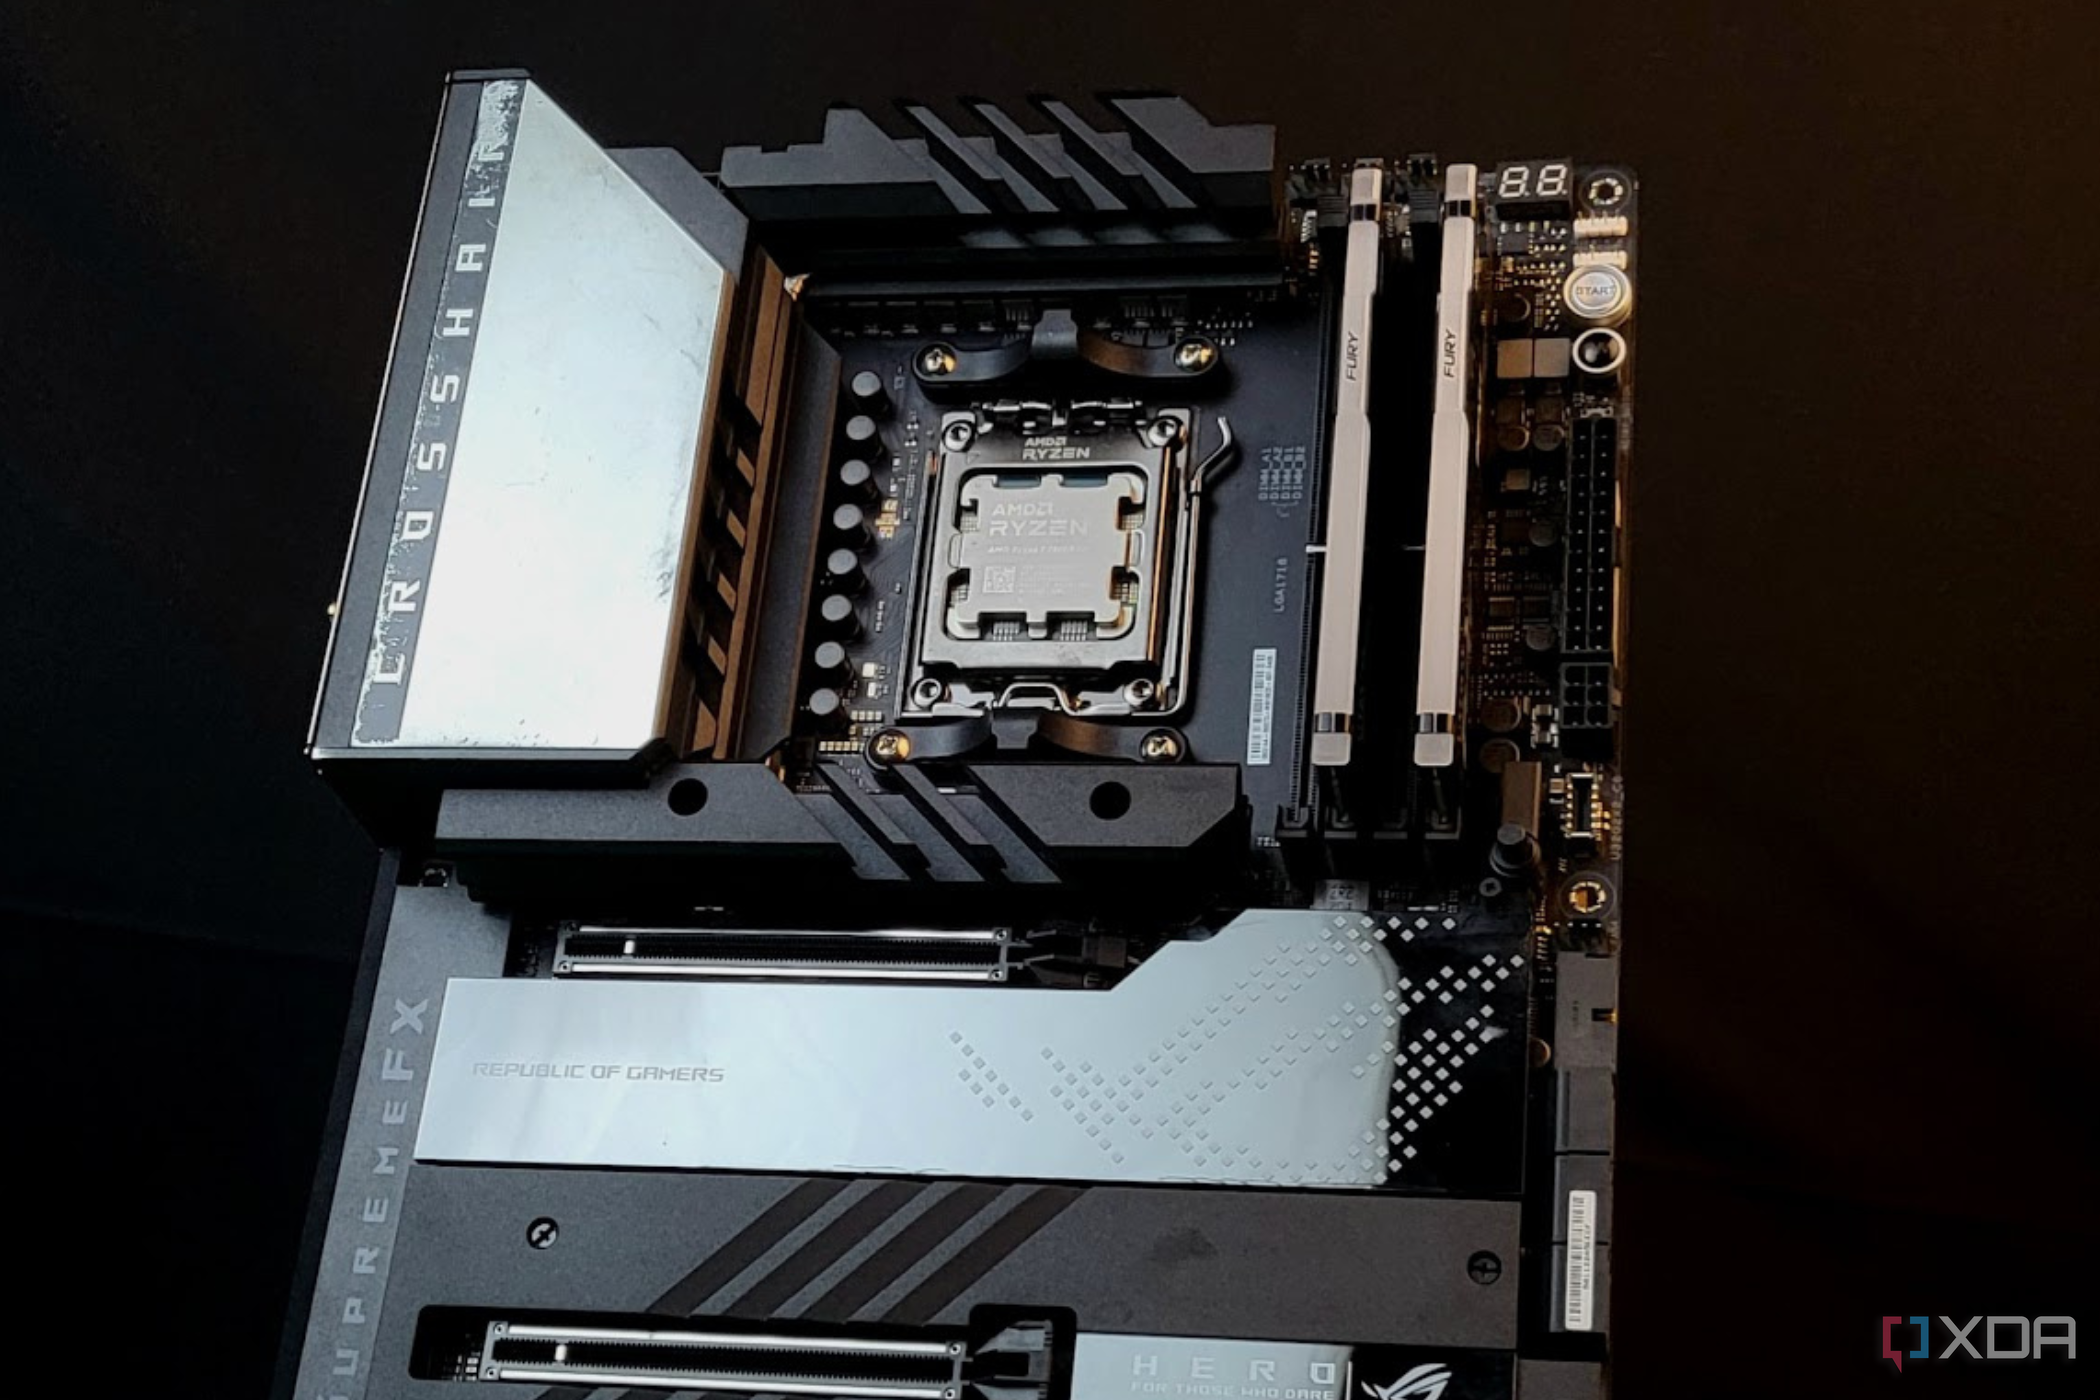 AMD Ryzen 7800X3D installed on an ASUS ROG Crosshair X670 E Extreme Motherboard captured on a black background